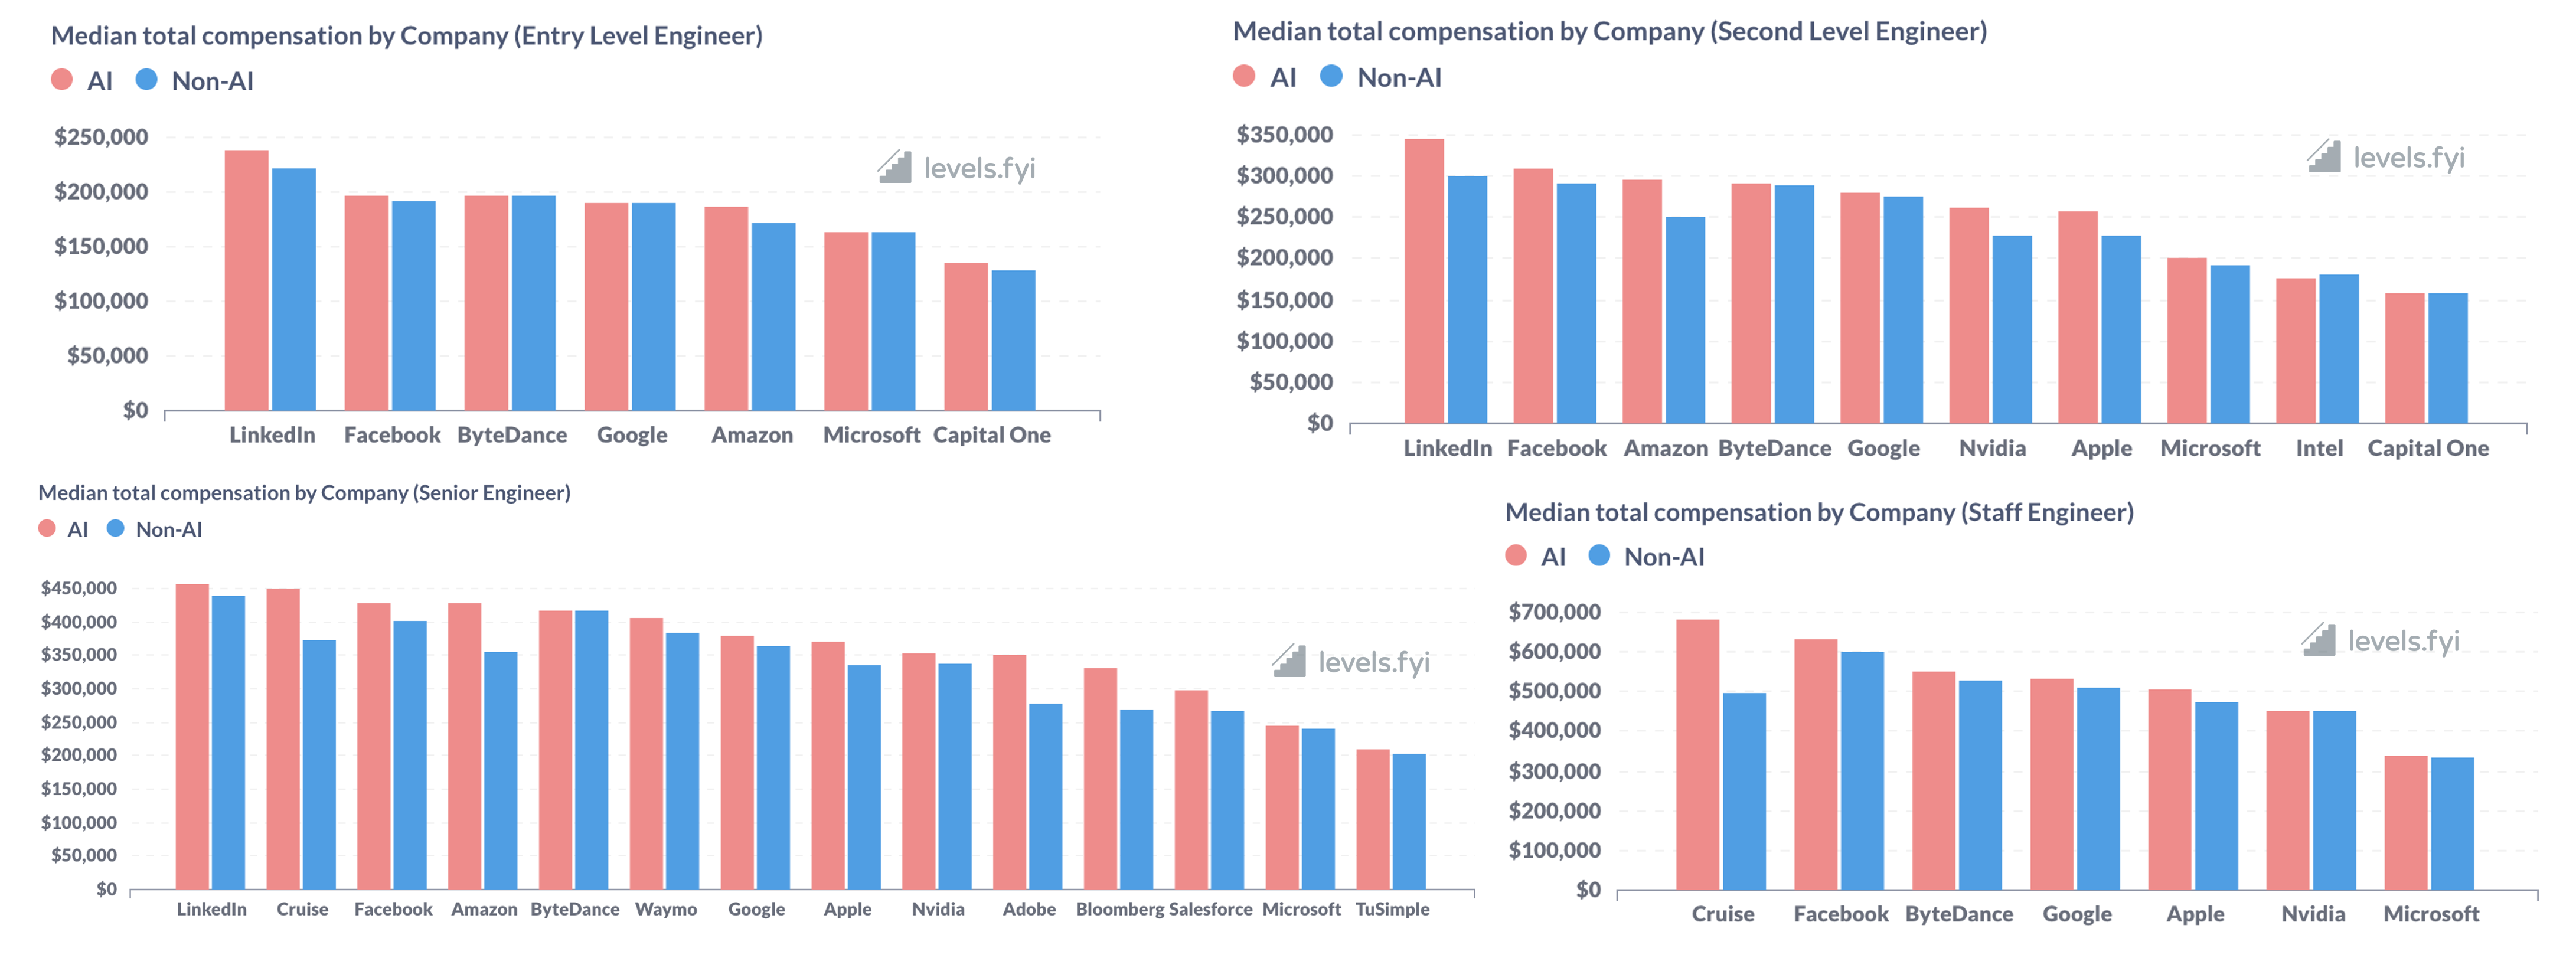 Total median compensation AI vs non-AI by company and by level